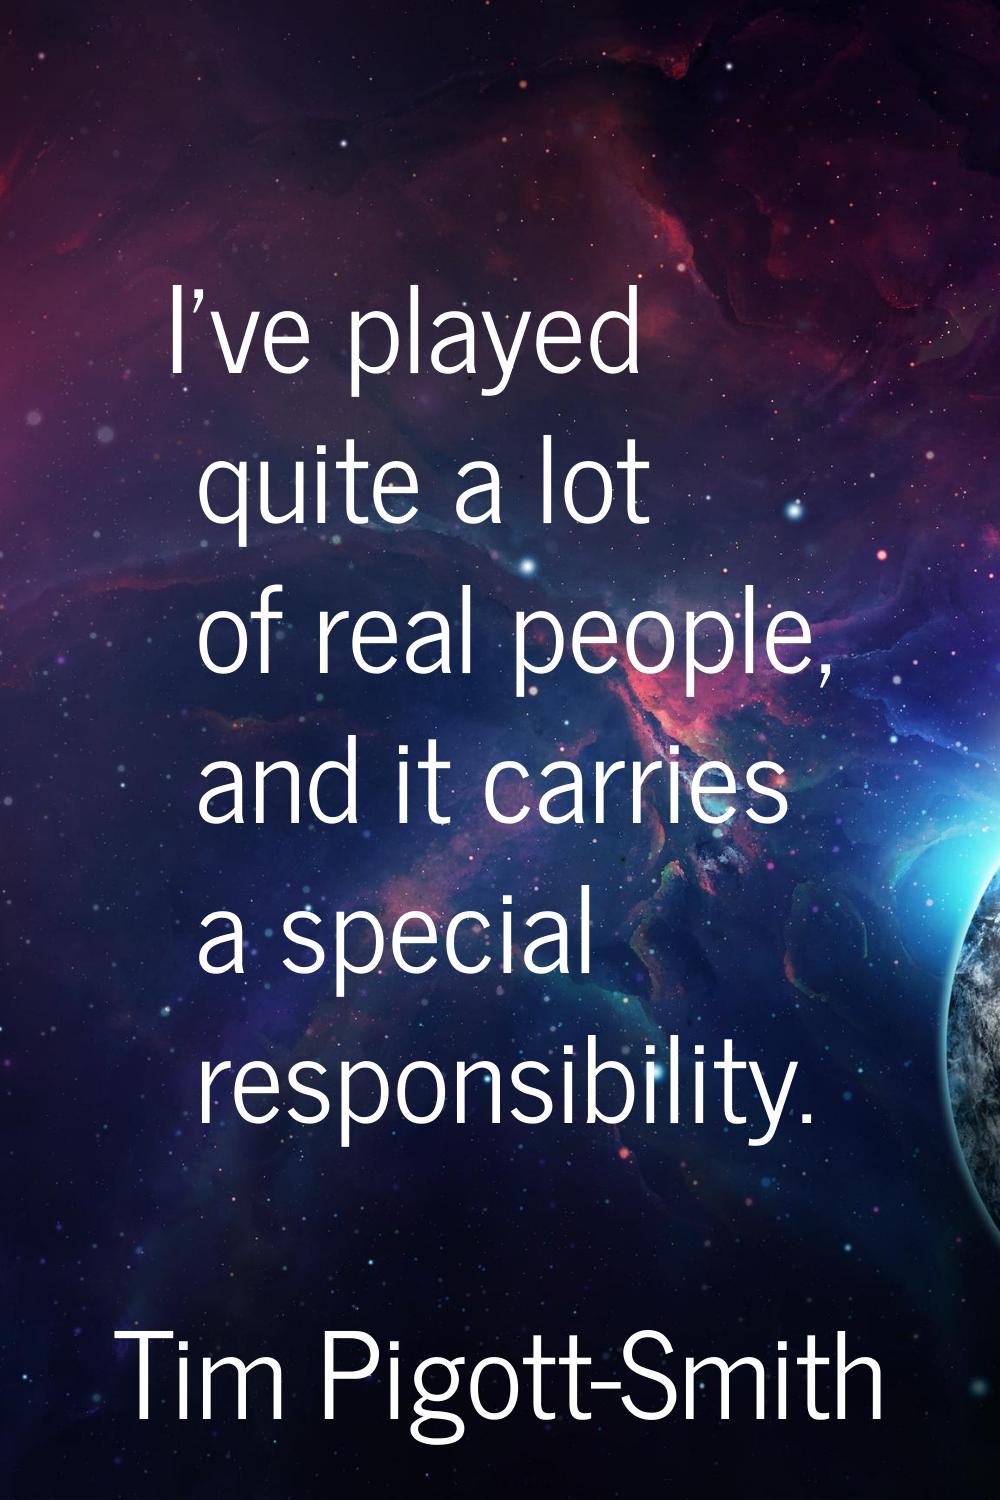 I've played quite a lot of real people, and it carries a special responsibility.